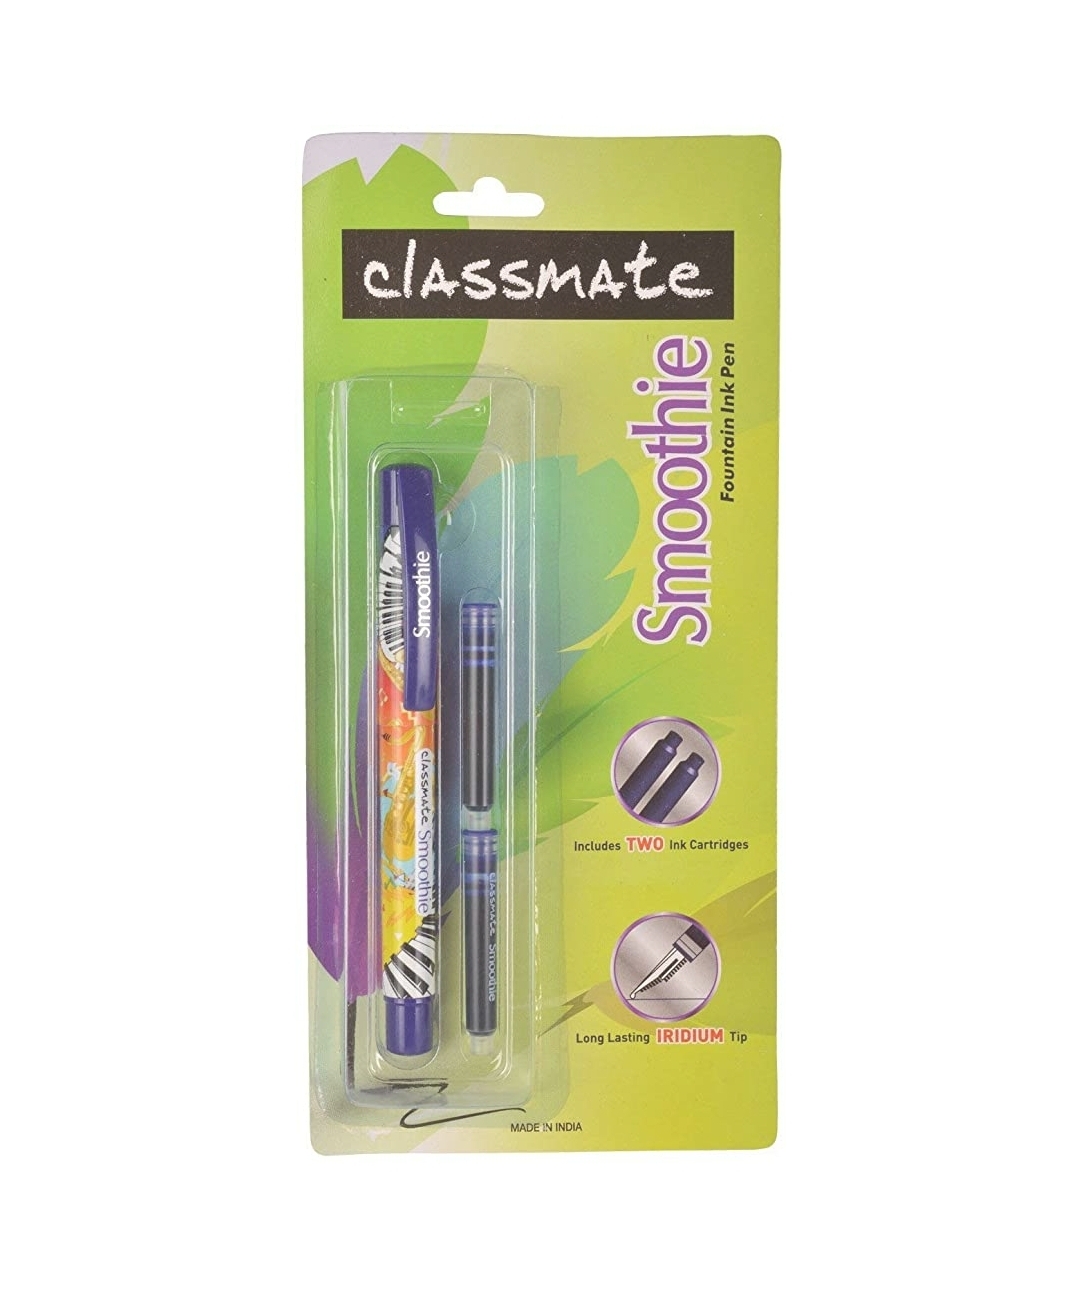 Classmate Smoothie Fountain Pen, 1s Blister Pack, Pack of 1